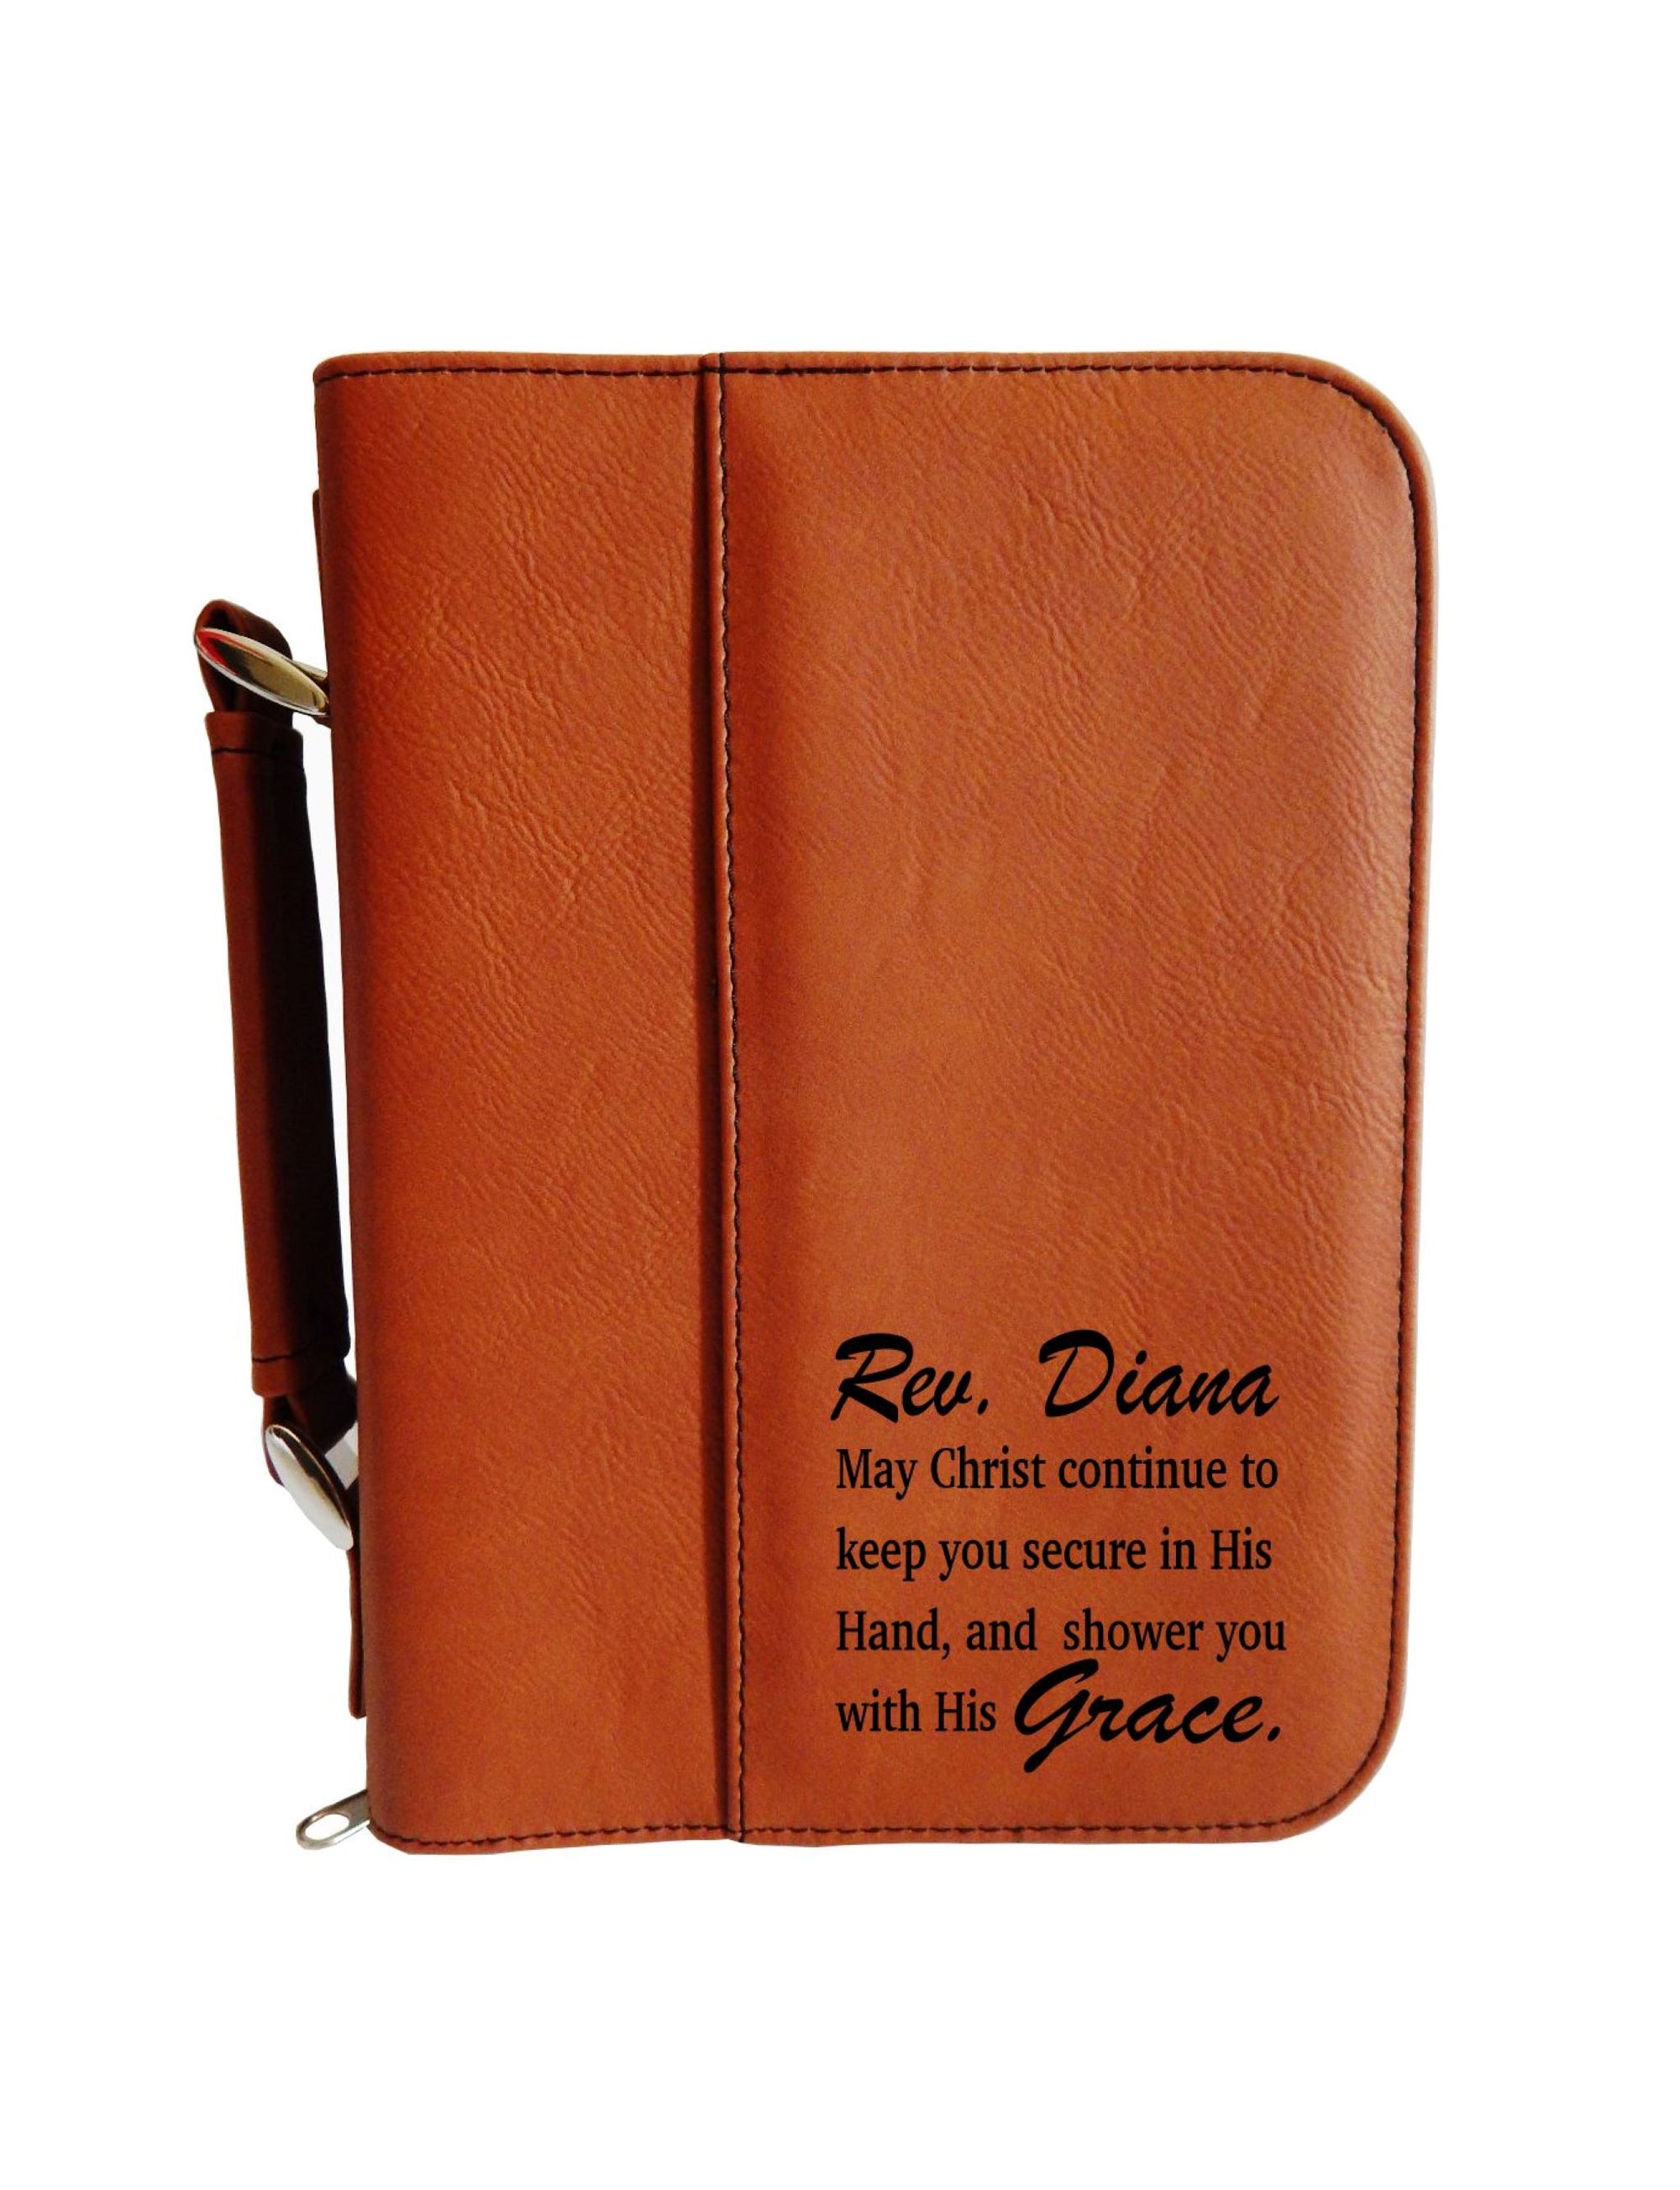 Christian Gifts for Women  | Religious Gift for Mom | Engraved Leather Bible Cover BCL016